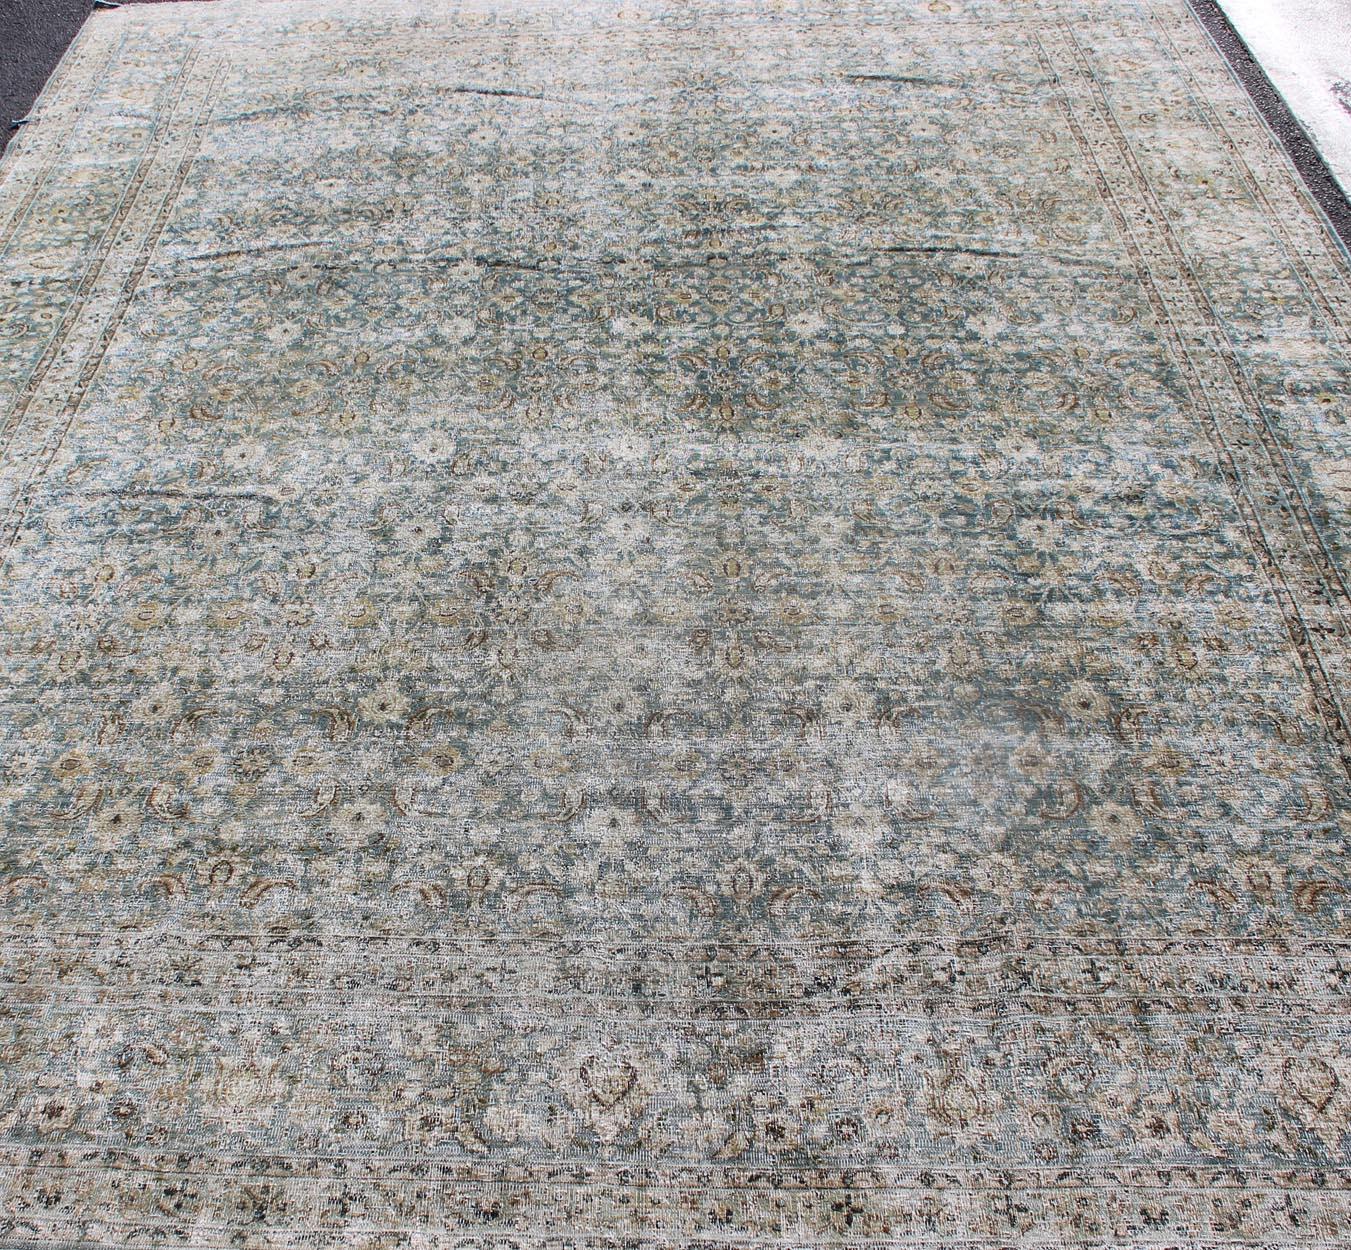 Antique Persian Khorasan Rug with Herati design in Blue, Light Gray & Brown For Sale 3